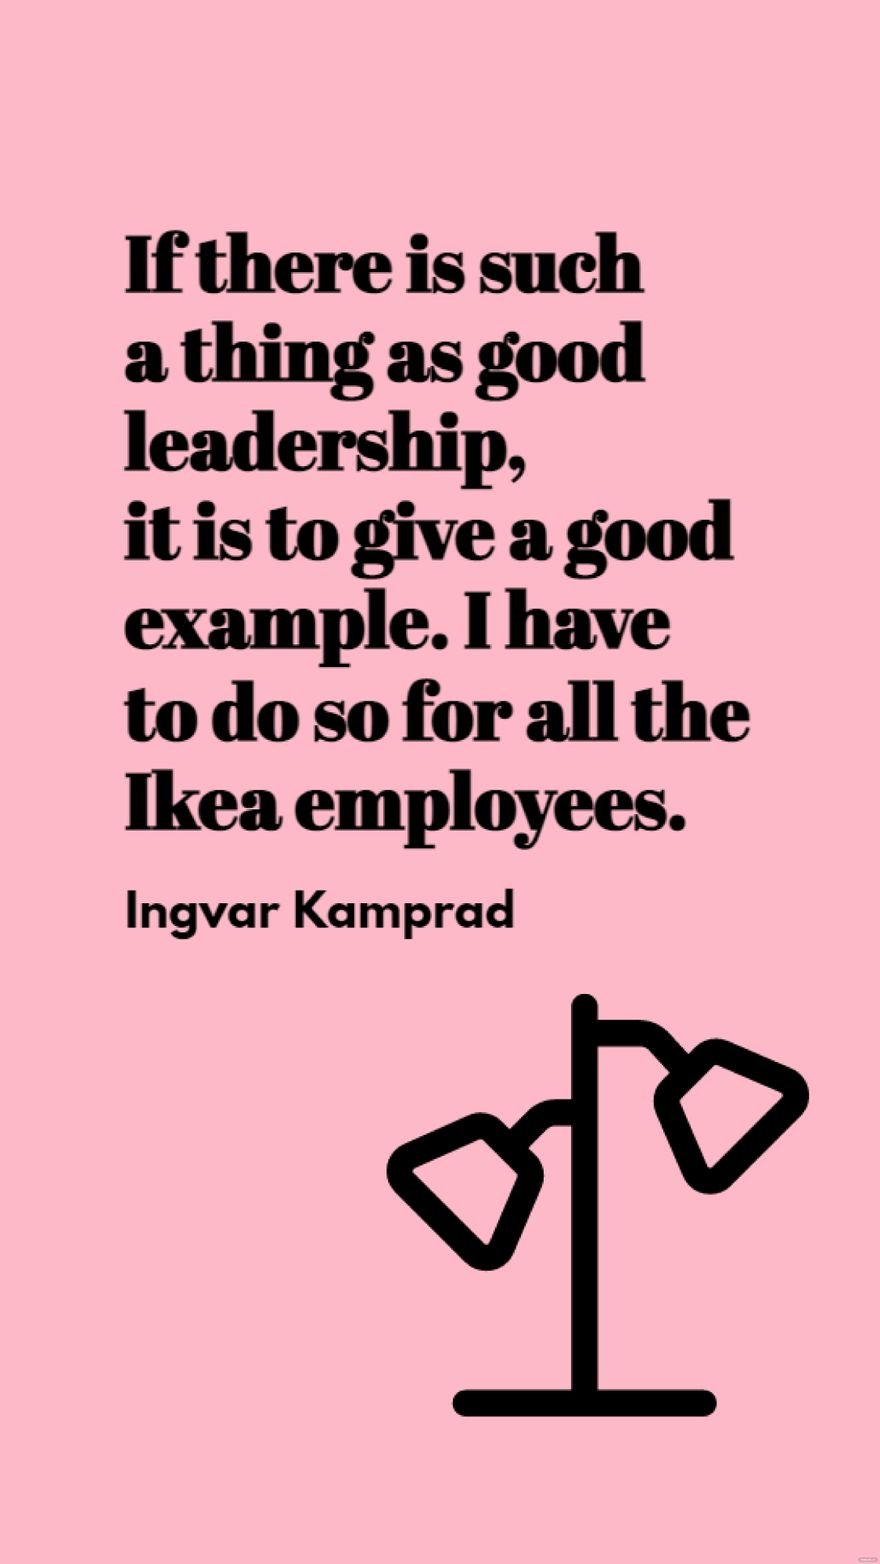 Ingvar Kamprad - If there is such a thing as good leadership, it is to give a good example. I have to do so for all the Ikea employees.